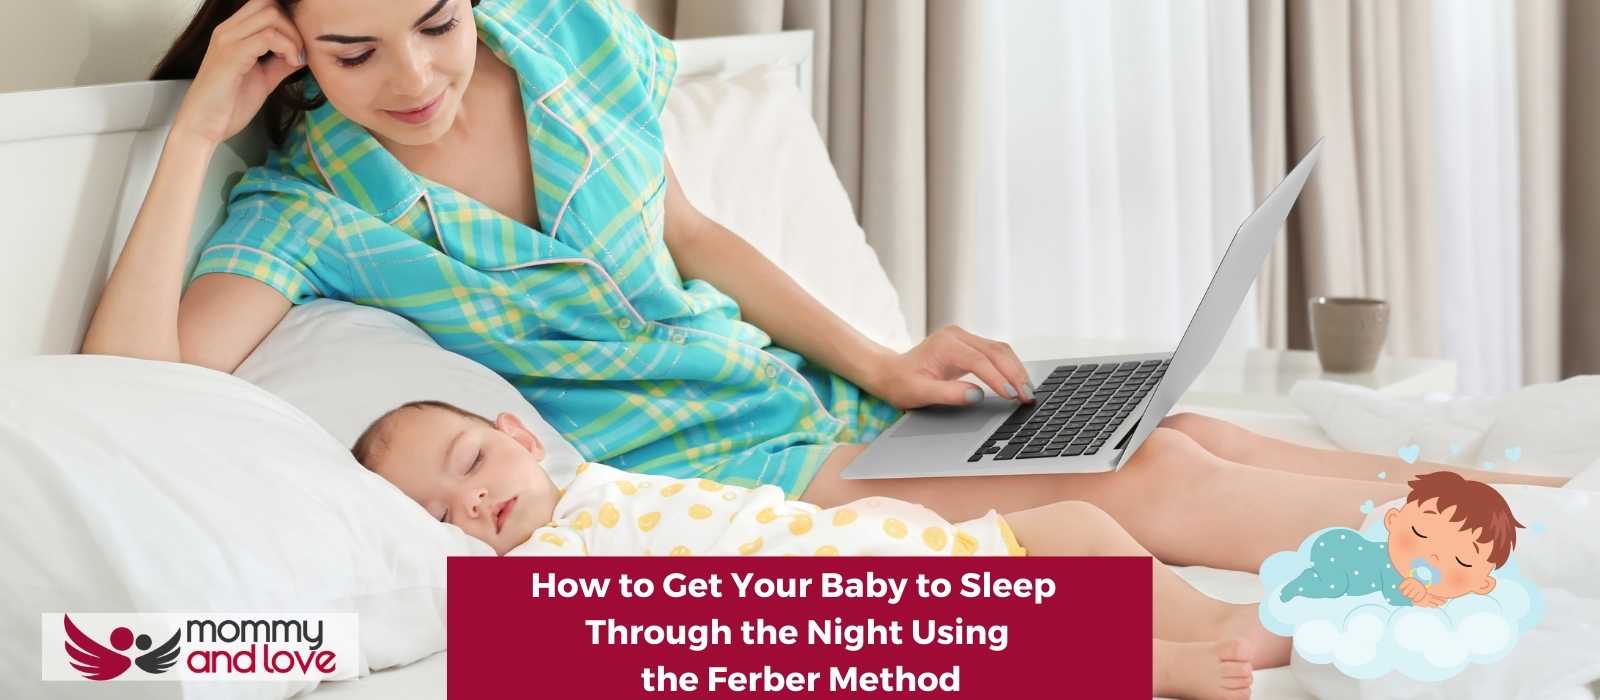 How to Get Your Baby to Sleep Through the Night Using the Ferber Method